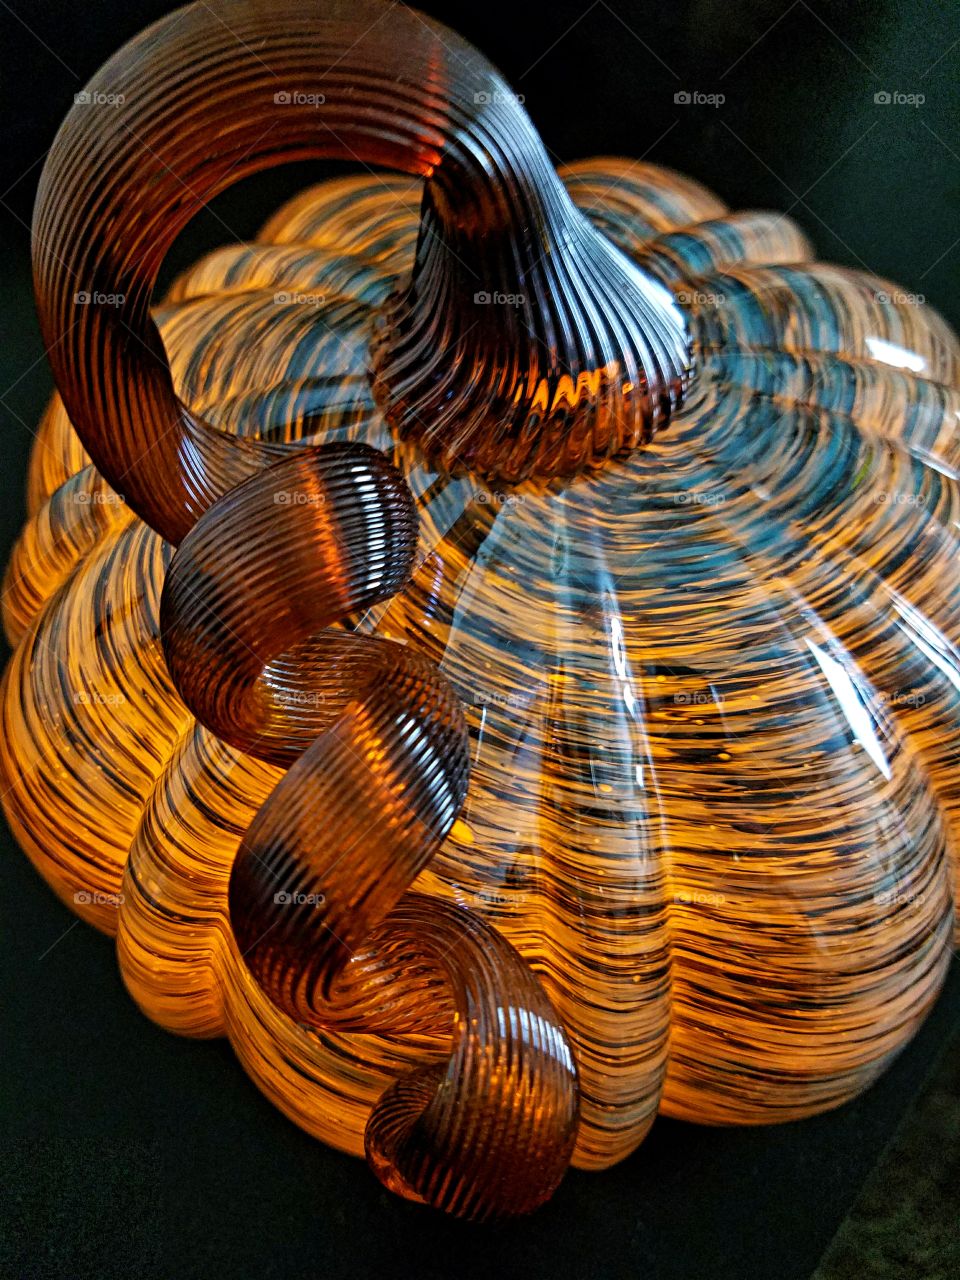 Striated and Smooth Blown Glass Art Piece!